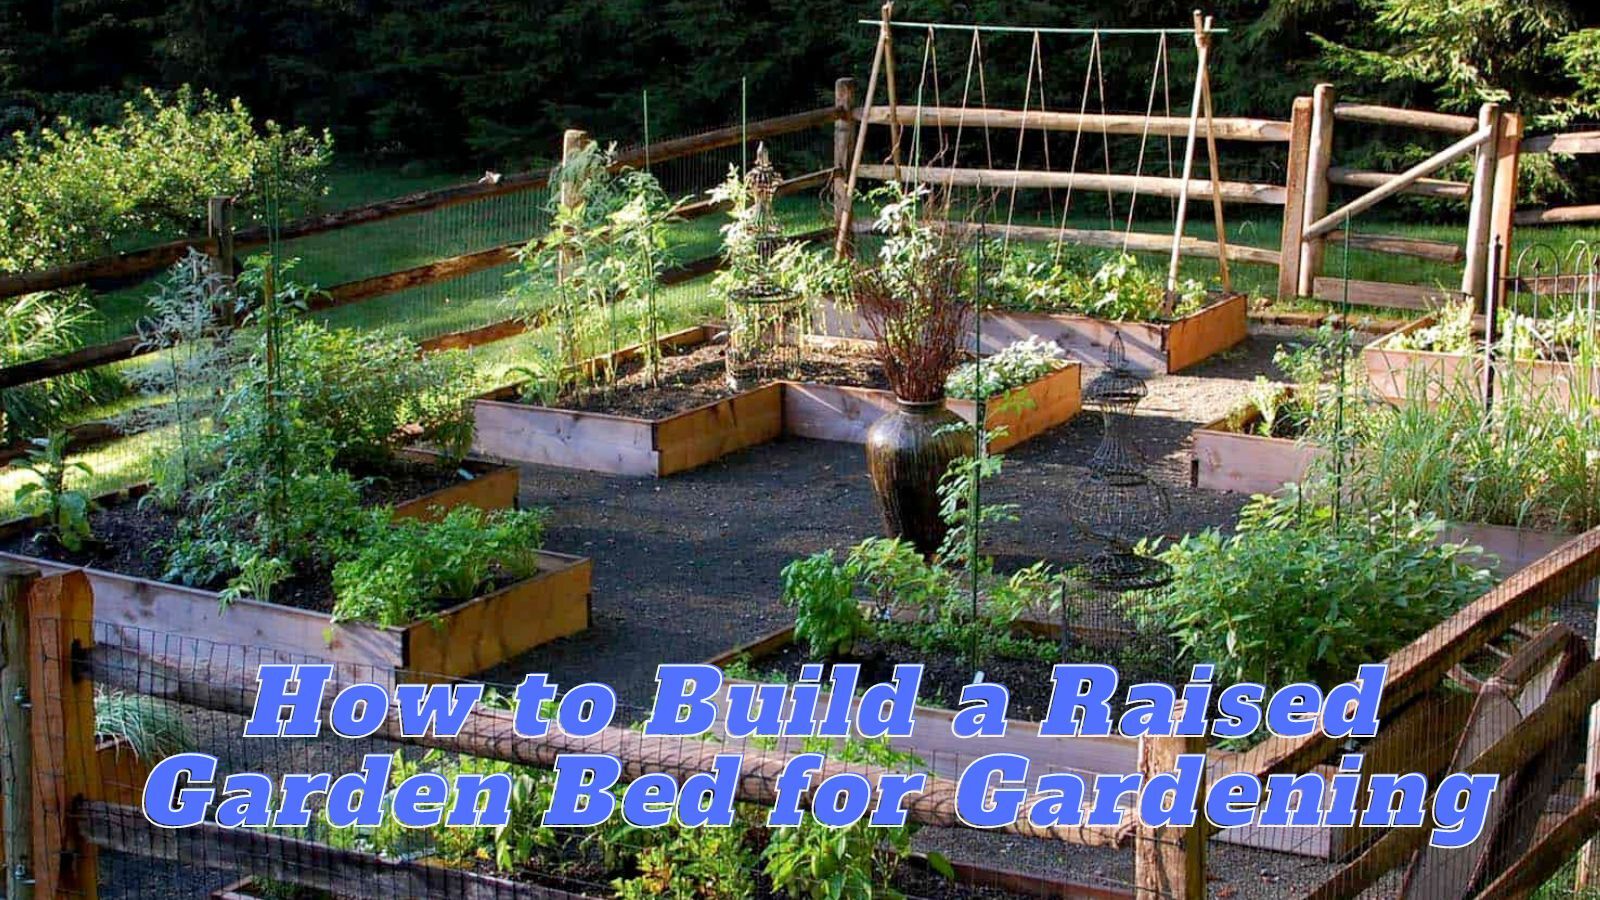 How to Build a Raised Garden Bed for Gardening (DIY Green House Cabinet in CHEAP & EASY)